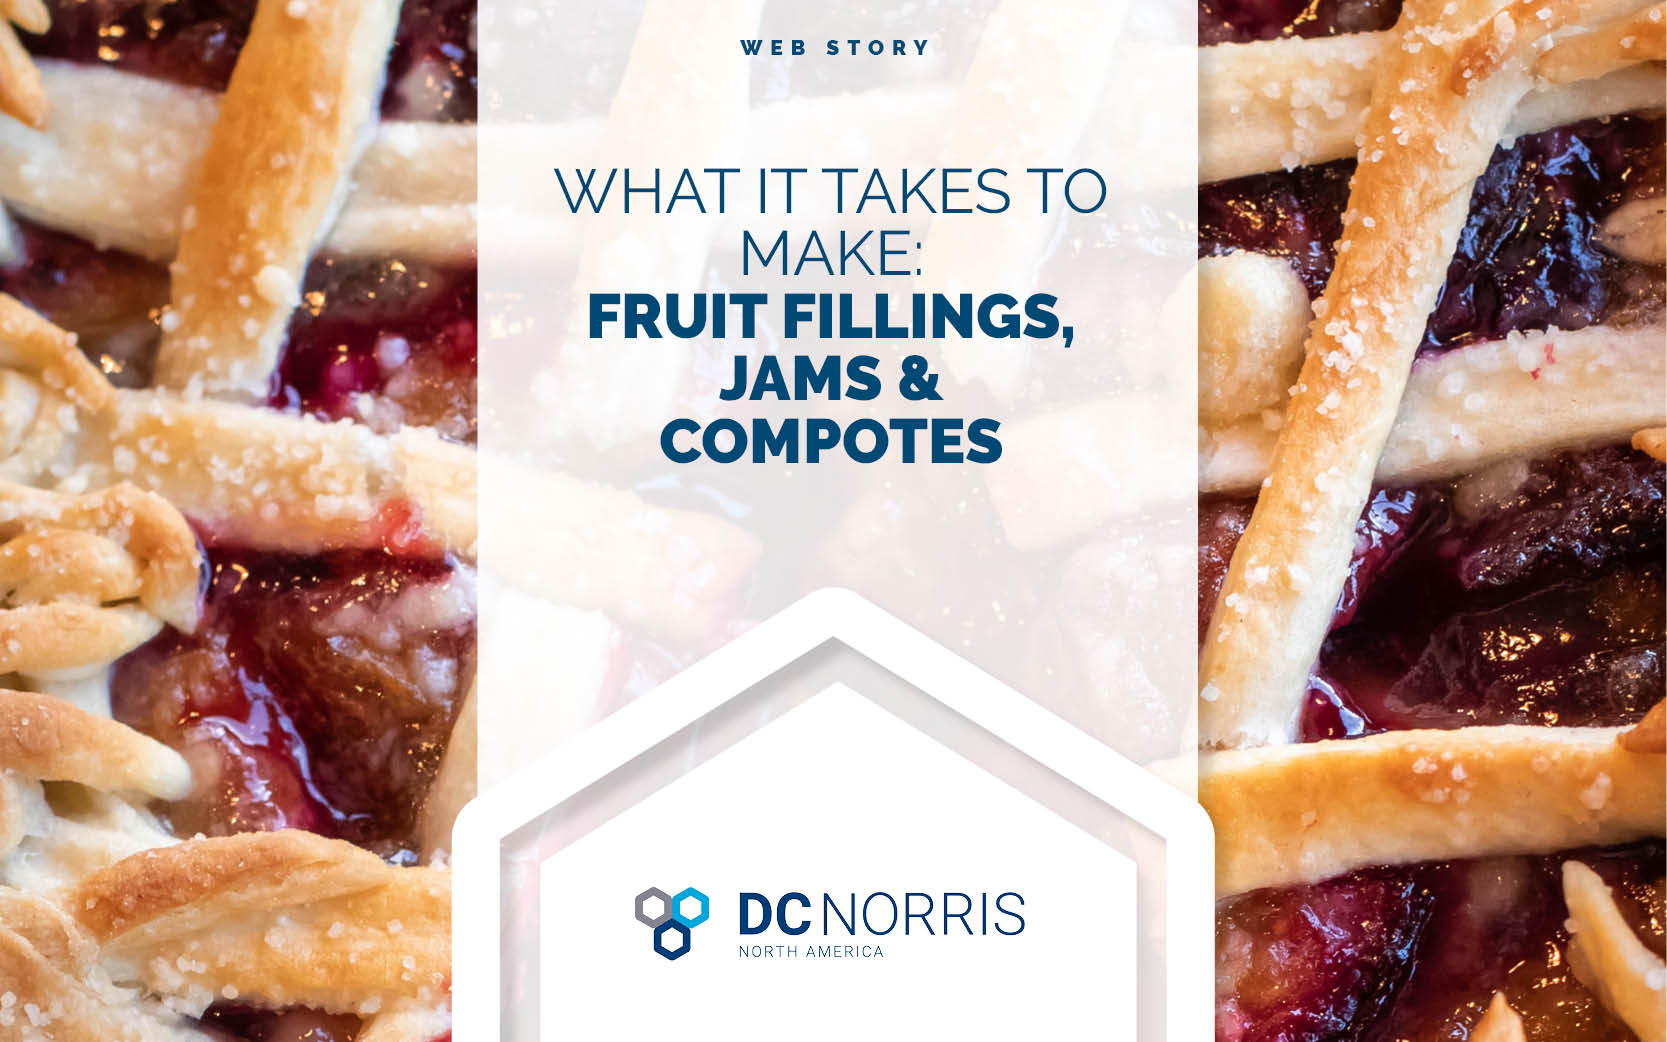 a fruit pie with a lattice topping makes up the background image. above it there is a headline that reads: what it takes to make fruit fillings, jams and compotes